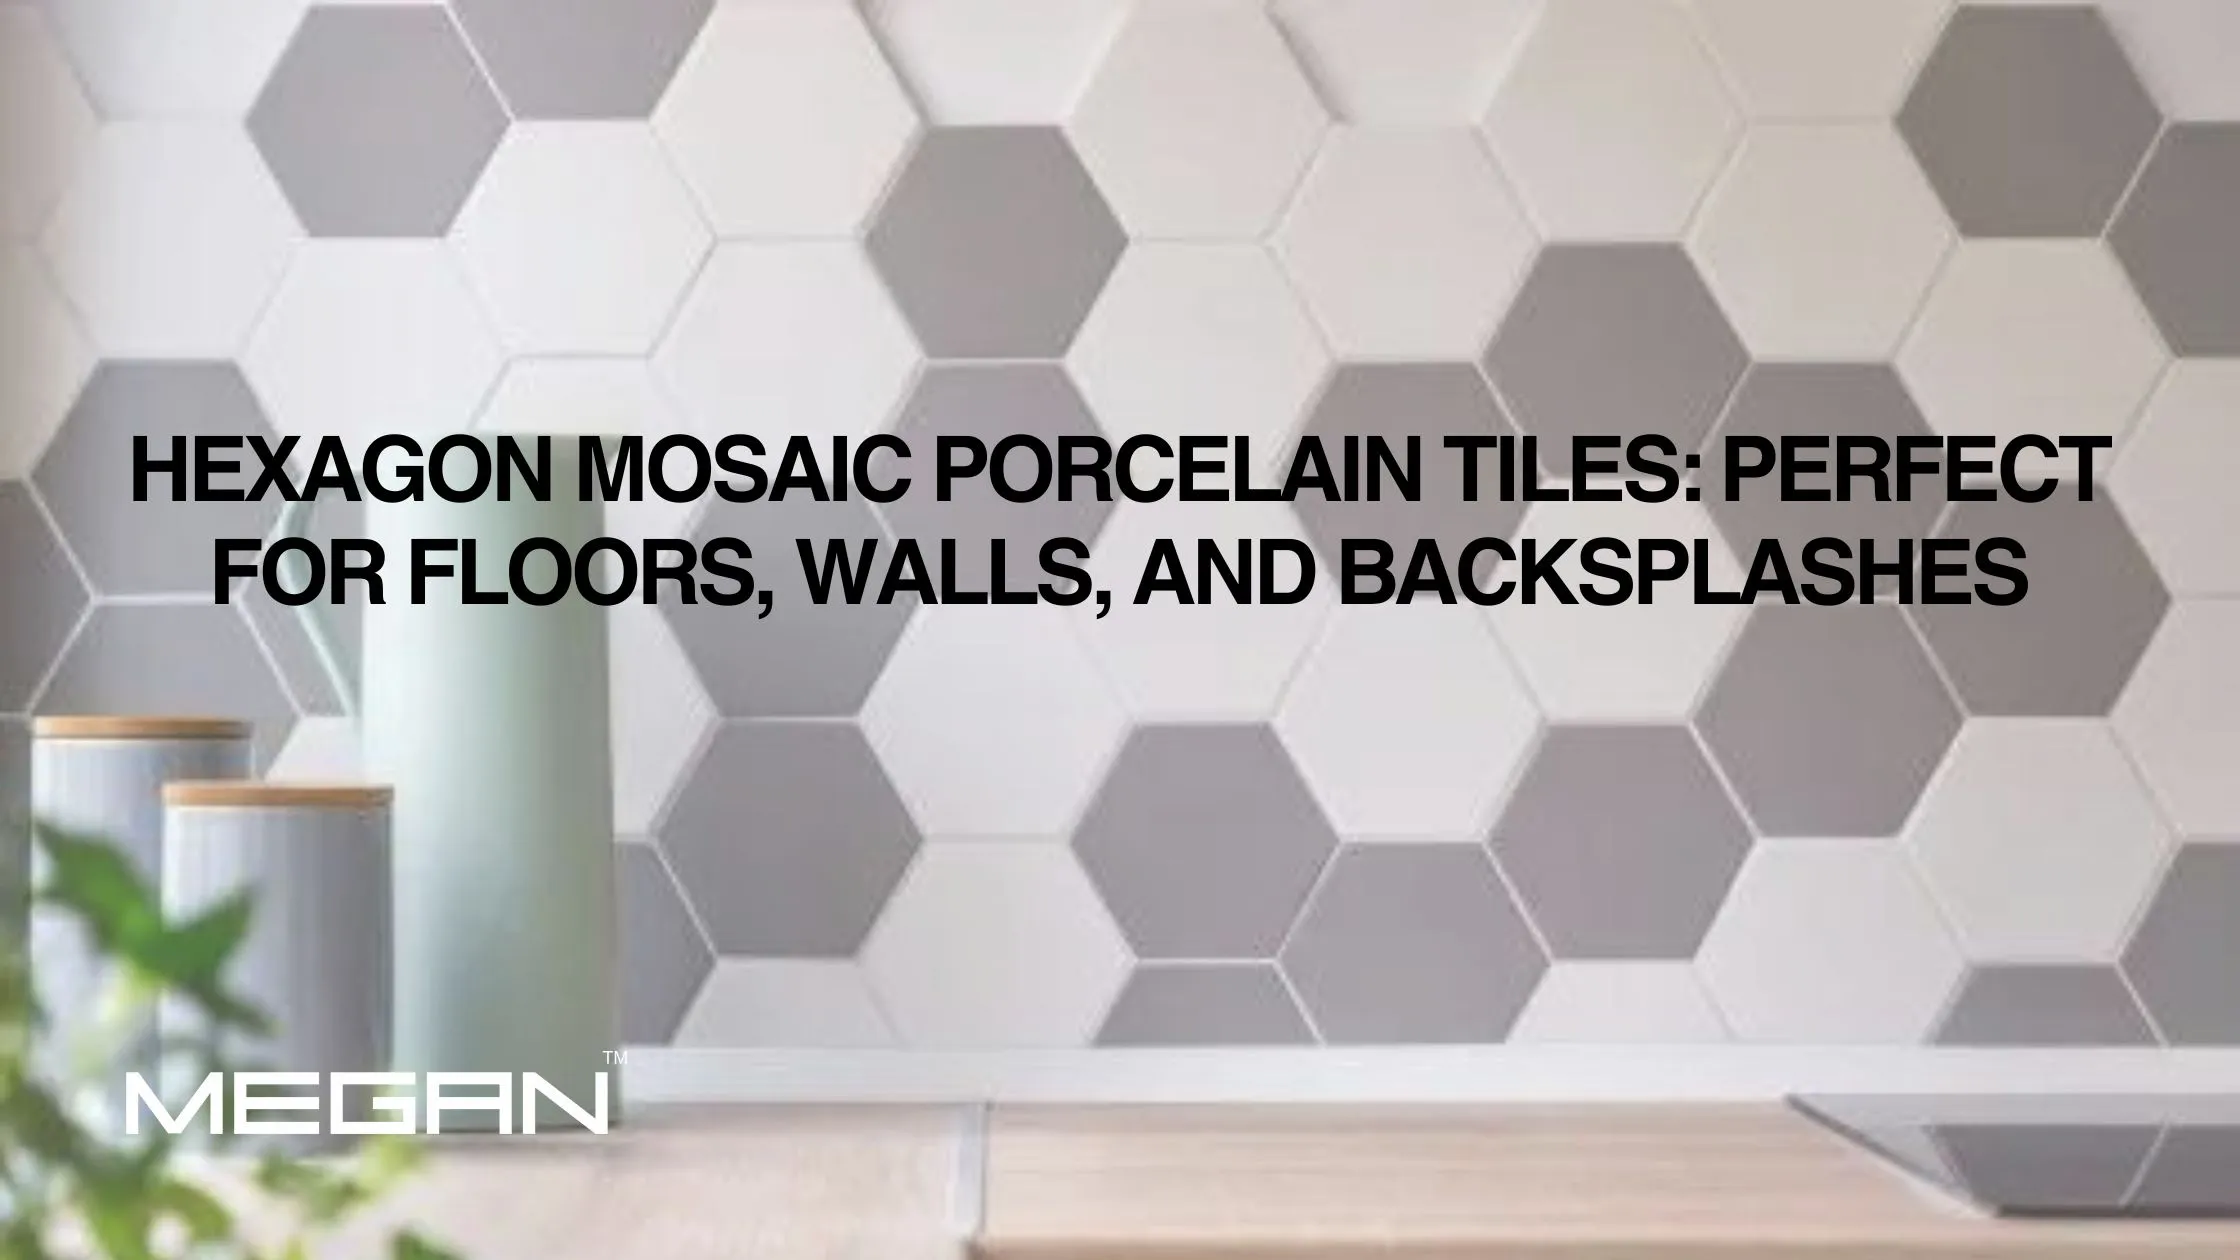 Hexagon Mosaic Porcelain Tiles: Perfect for Floors, Walls, and Backsplashes